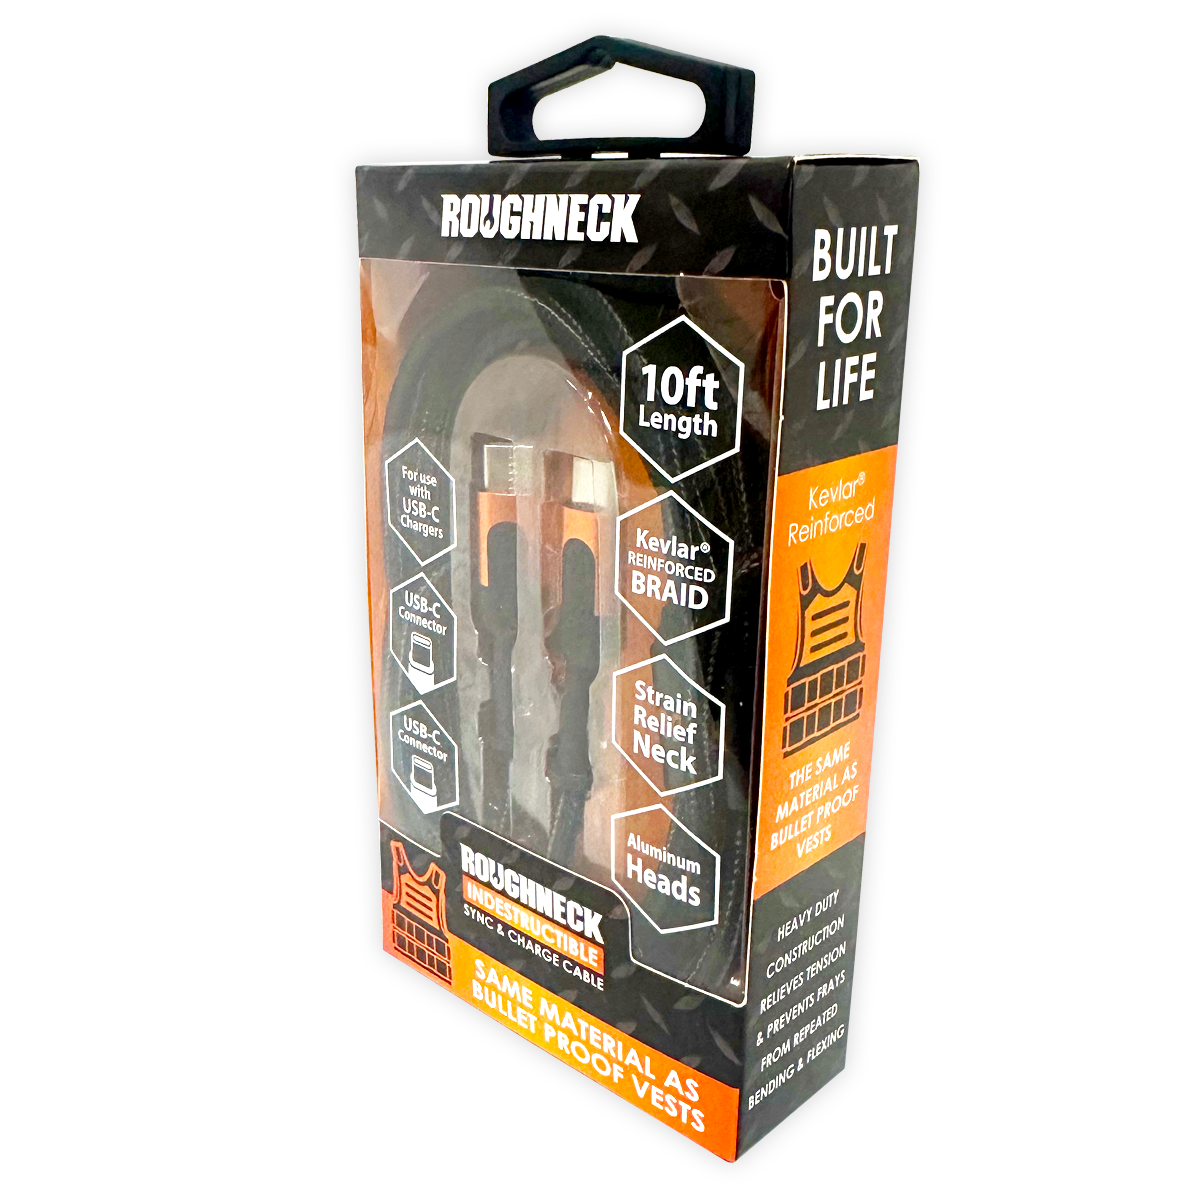 ITEM NUMBER 024571 ROUGHNECK 10FT USB-C-TO-USB-C CABLE 3 PIECES PER DISPLAY